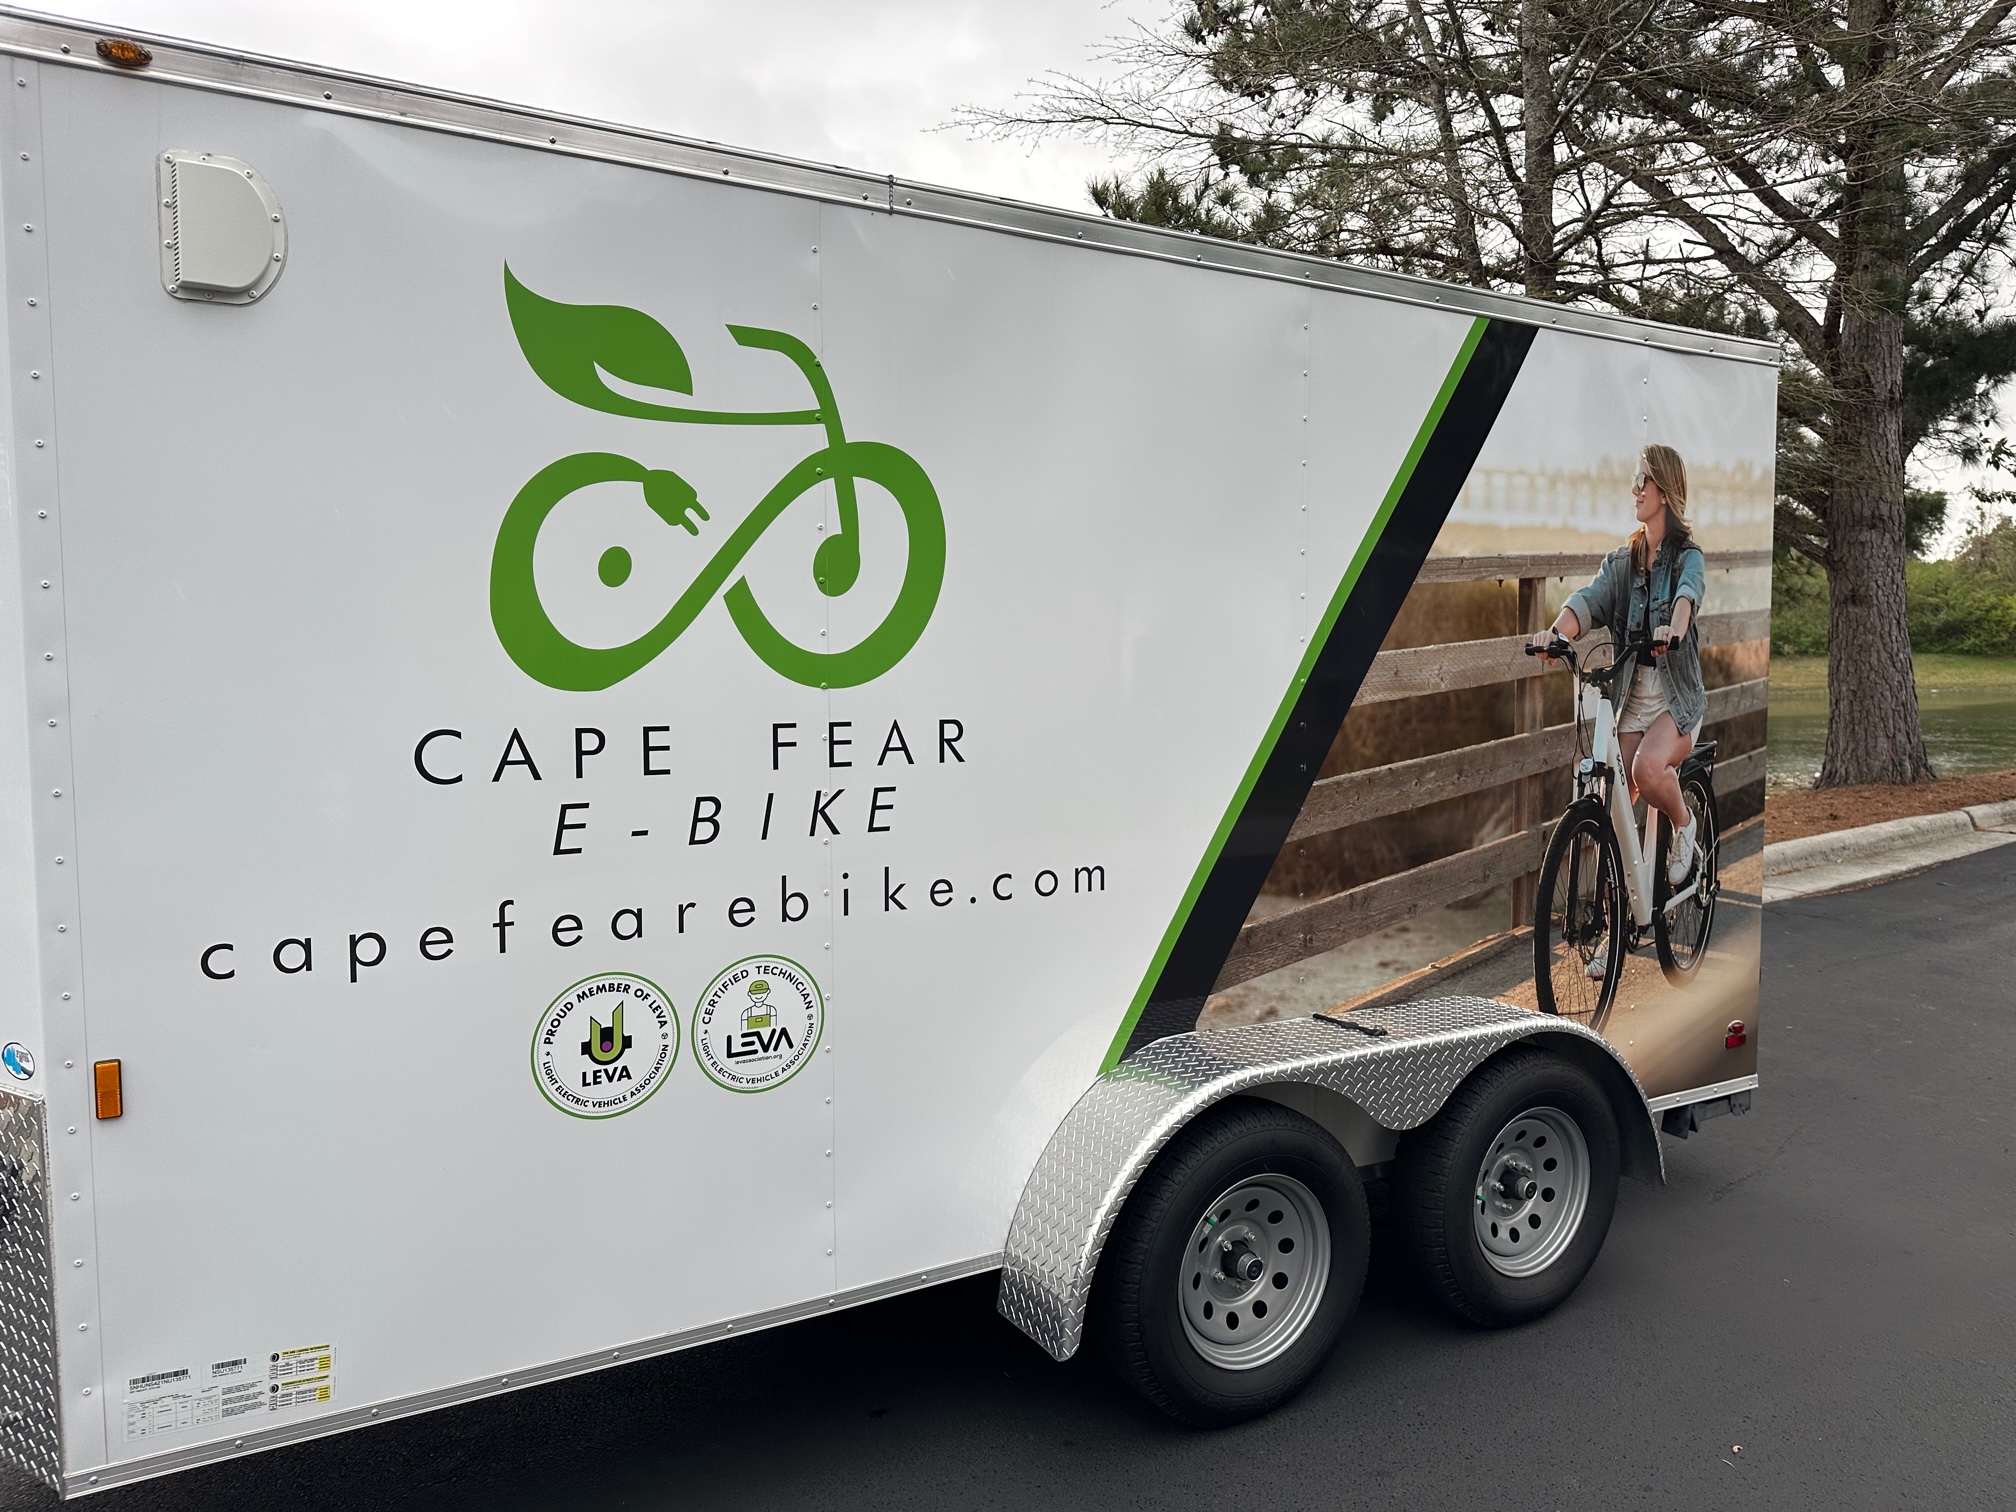 Commercial truck wrap on e-bike printed by Saltwater Signworks in Wilmington